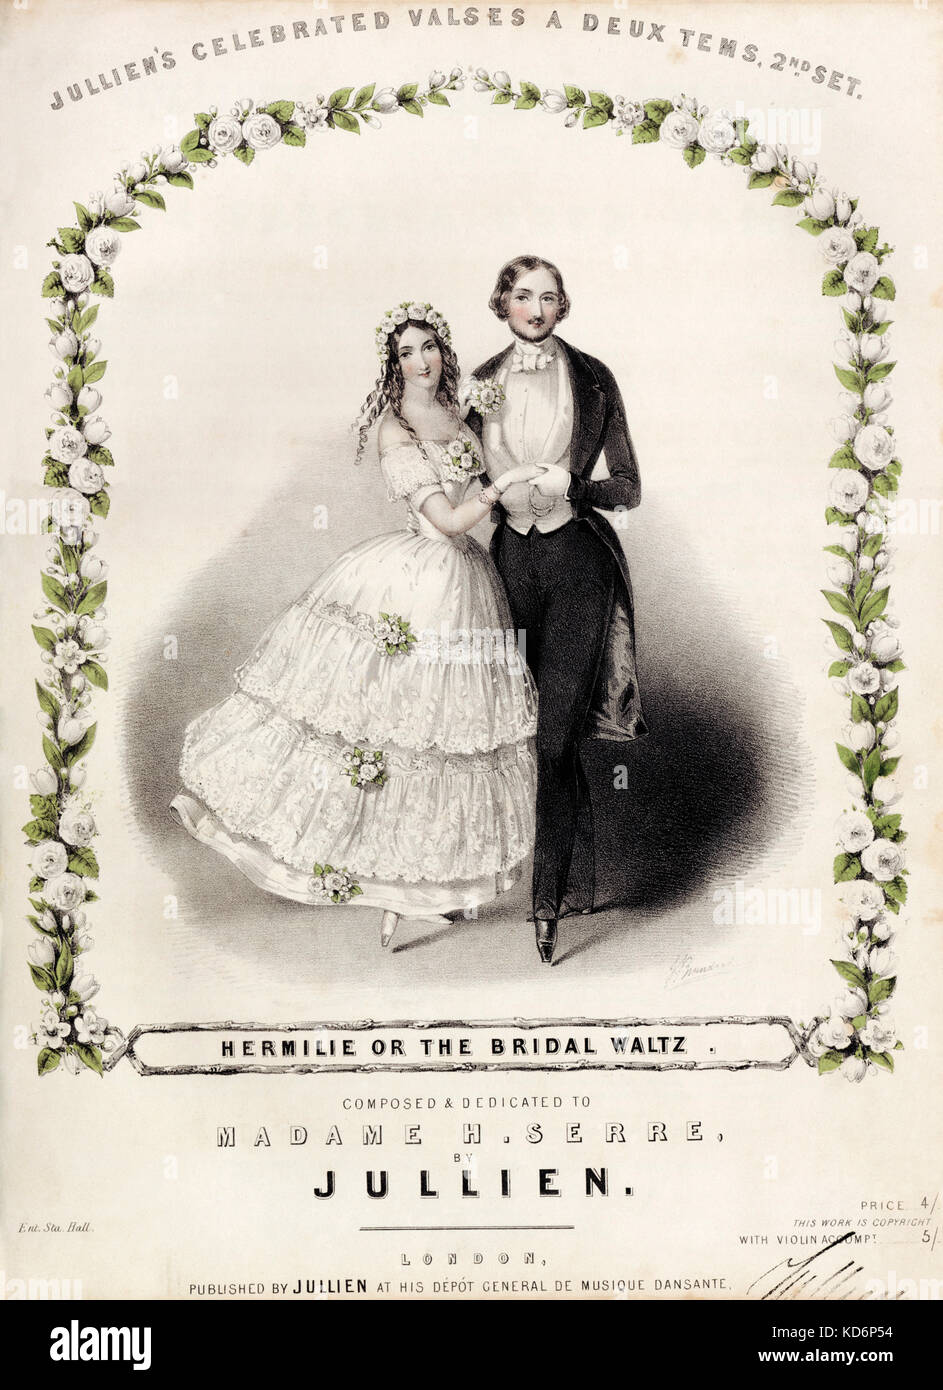 Queen Victoria and Prince Albert wedding dance. Called 'Hermilie or the Bridal Waltz' because disrespectful to refer directly to the Queen.Published, London, Julien, before 1846 - around time of Victoria 's accession to the throne of England.  Illustration by J. Brandard. 'Julien's celebrated valses a deux tems, 2nd set.' Shows steps. Stock Photo